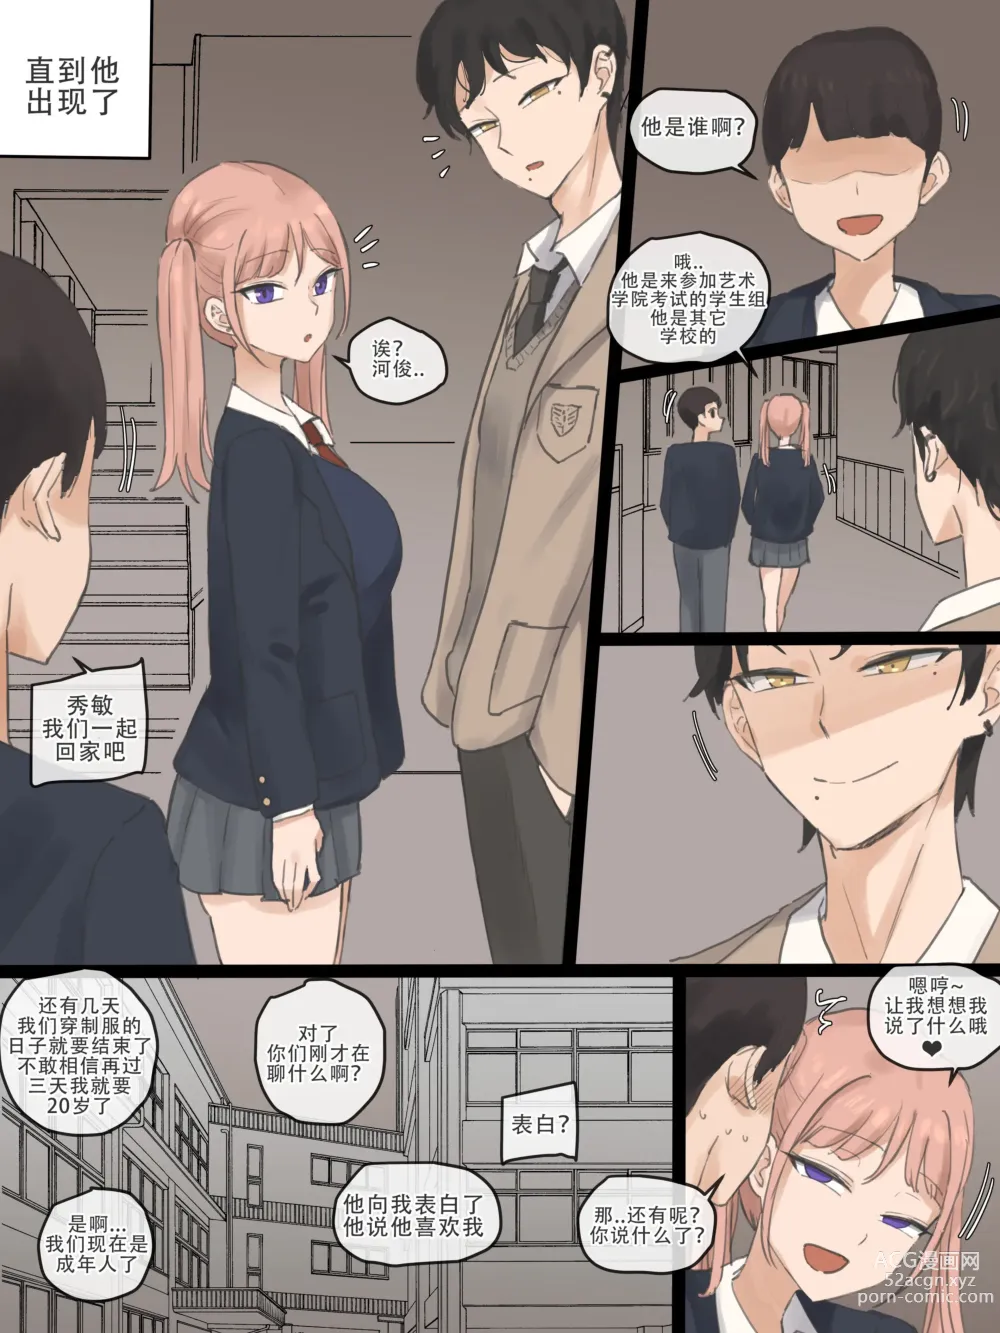 Page 9 of doujinshi NEVERTHELESS